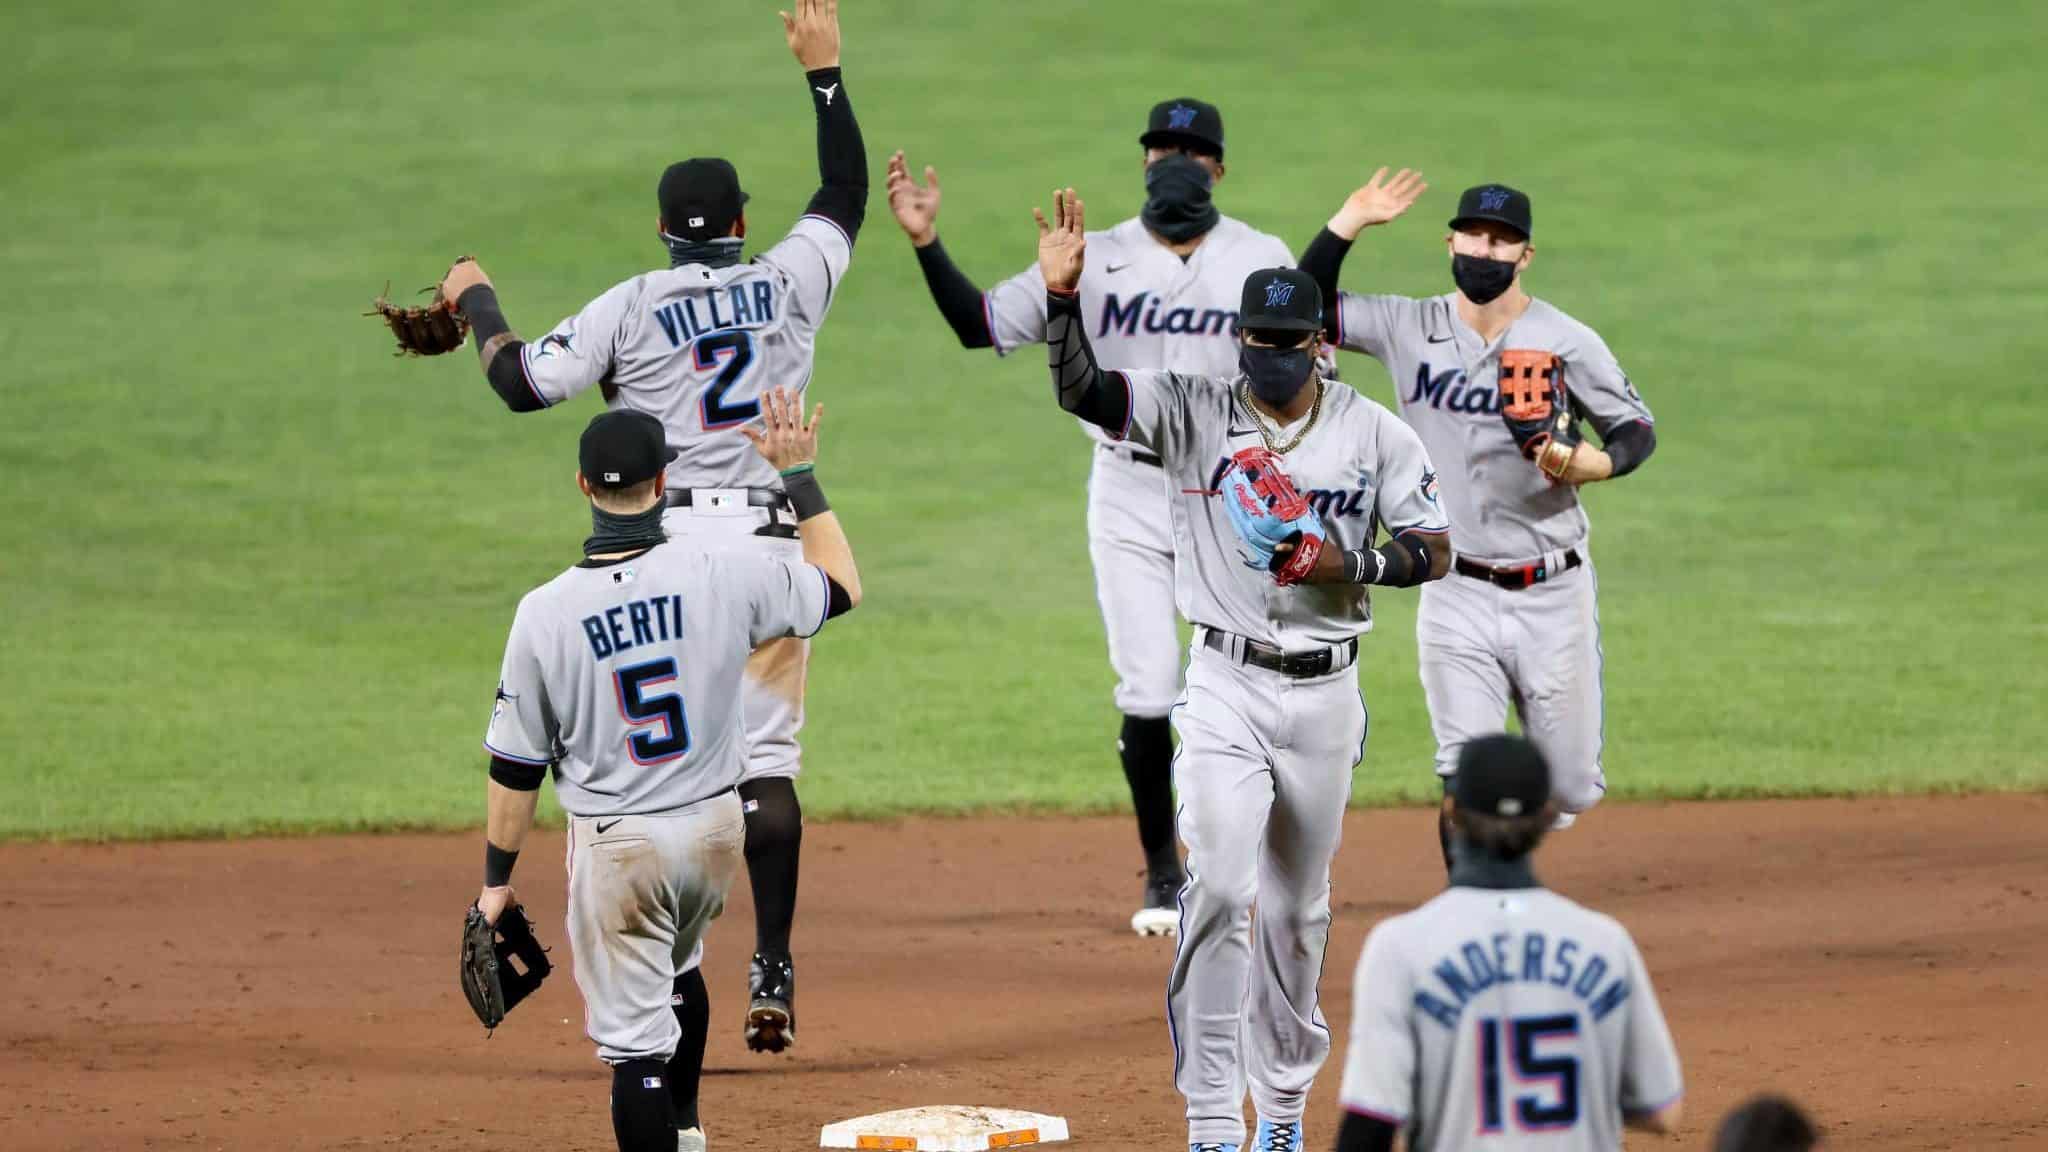 BALTIMORE, MARYLAND - AUGUST 04: Members of the Miami Marlins celebrate their 4-0 win over the Baltimore Orioles at Oriole Park at Camden Yards on August 04, 2020 in Baltimore, Maryland.